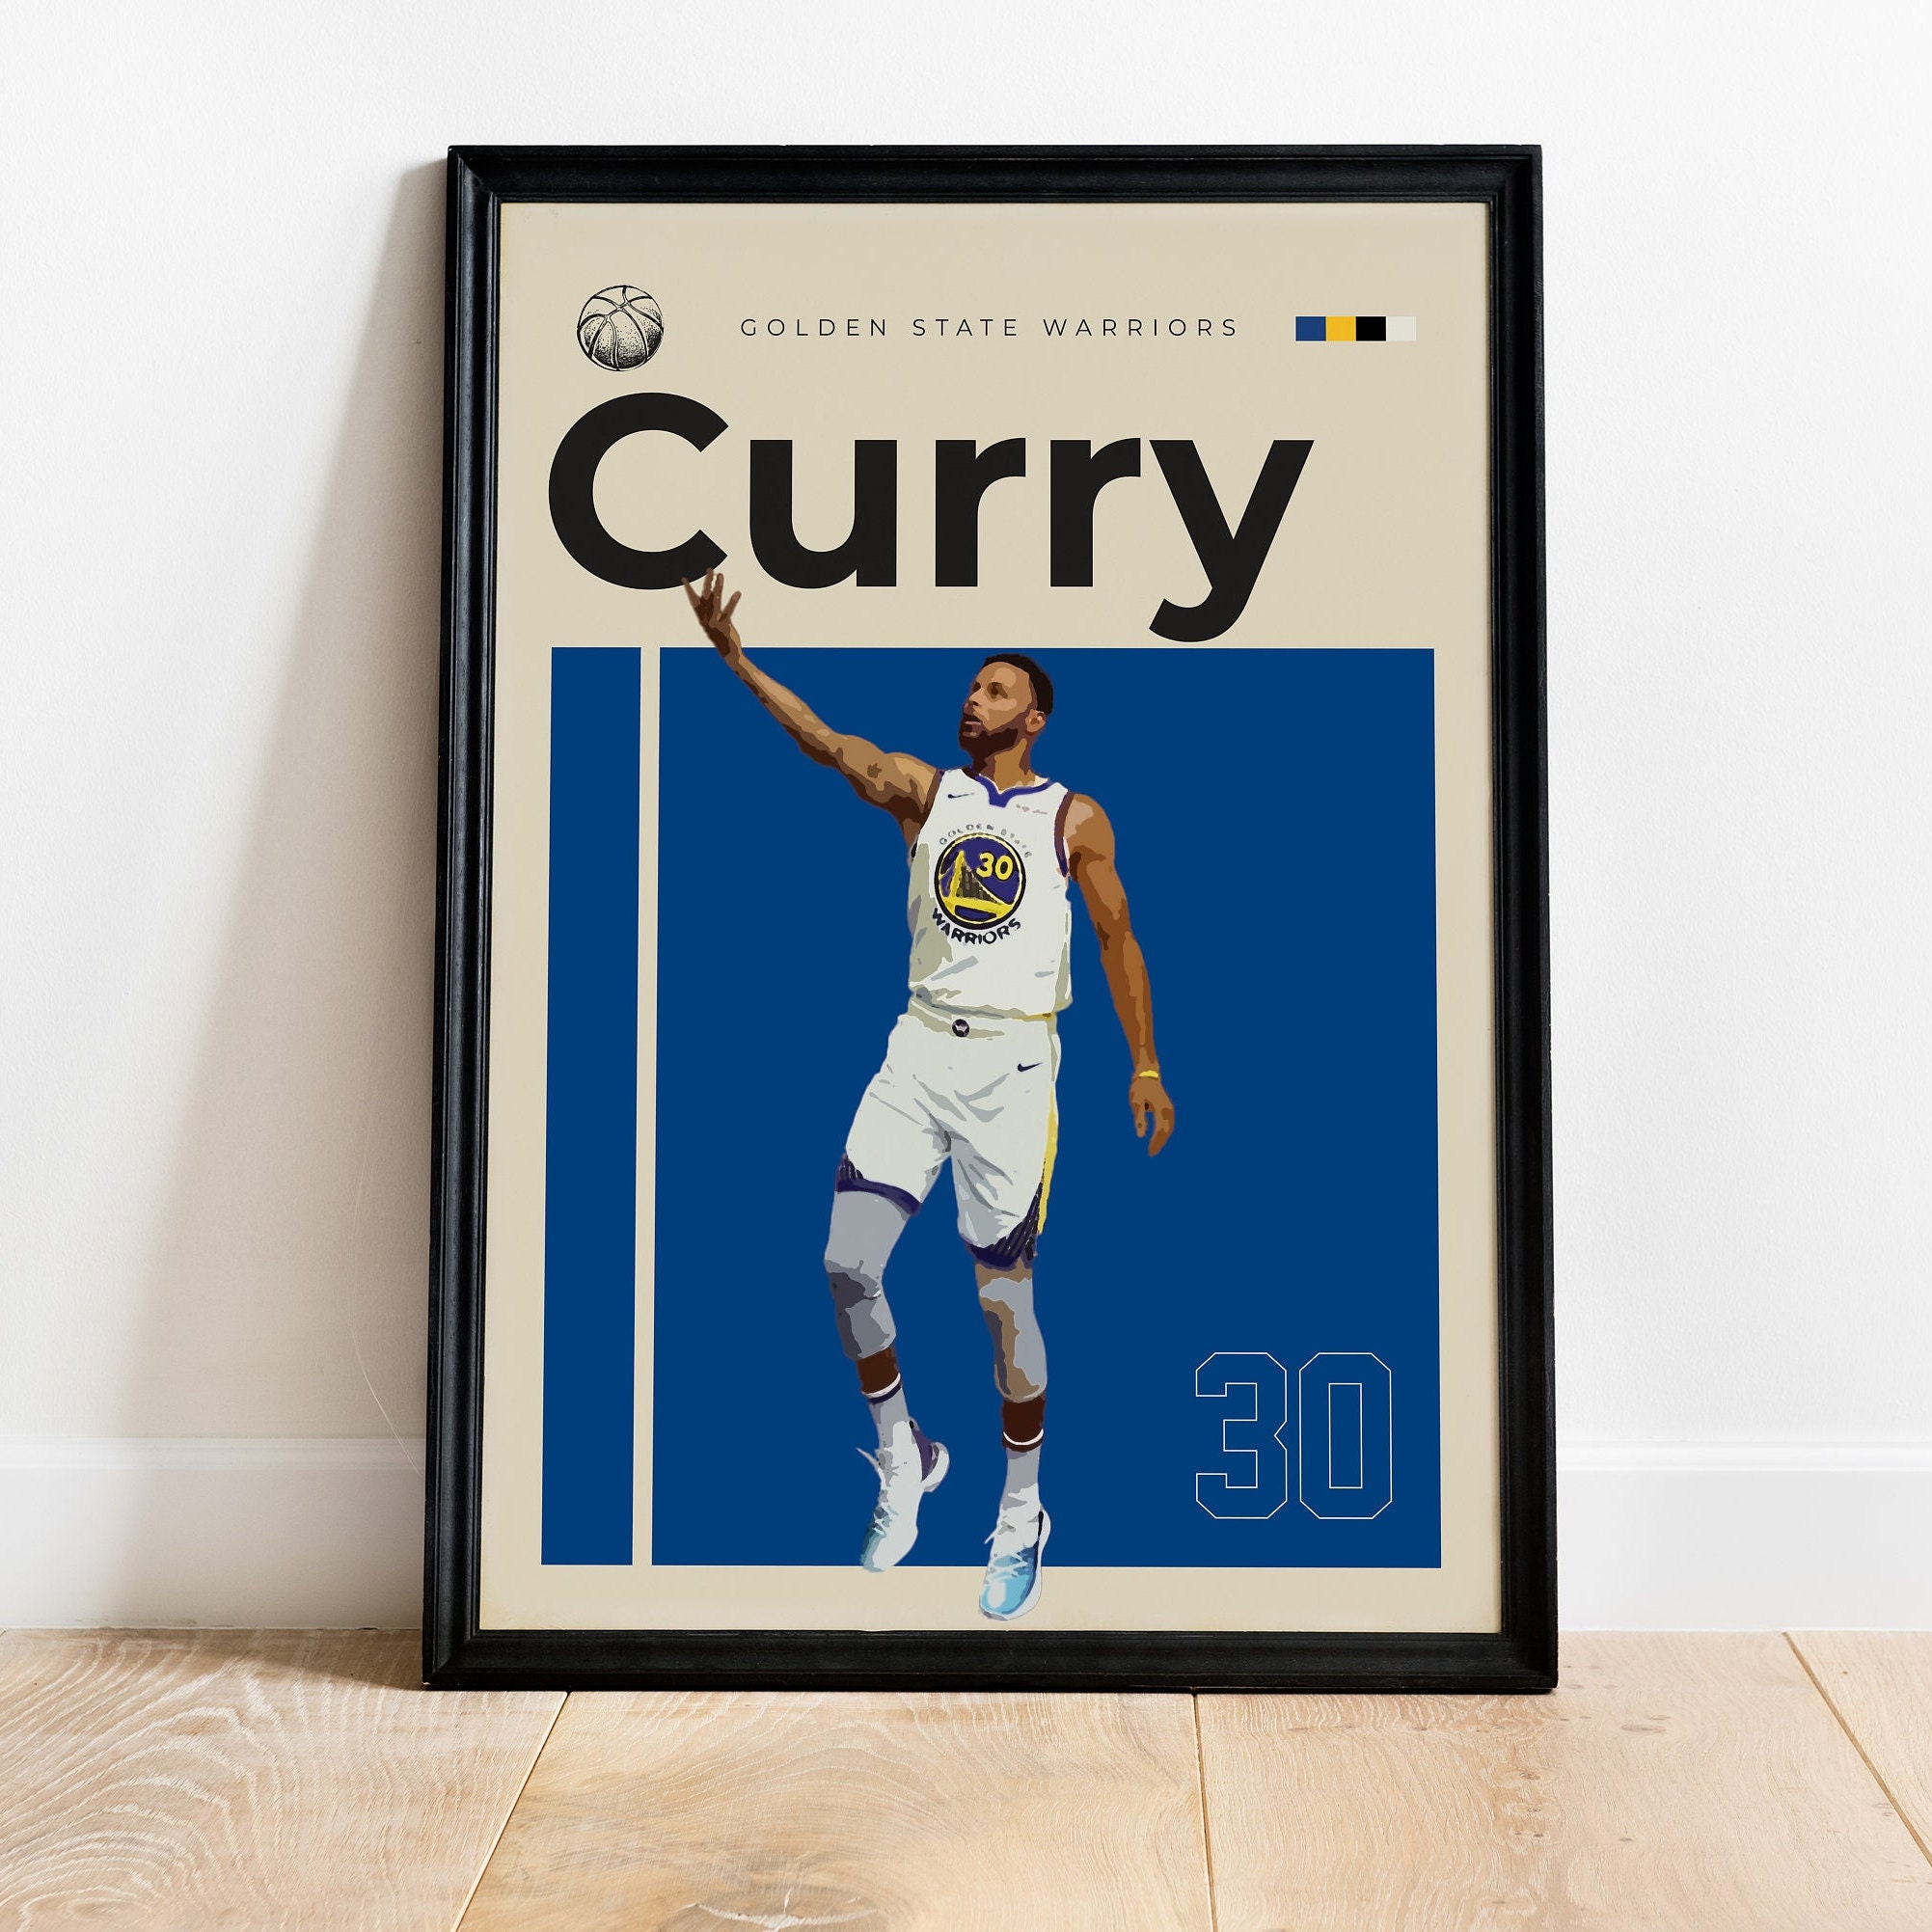 Steph Curry Signed Golden State Warriors LED Framed Nike Blue with